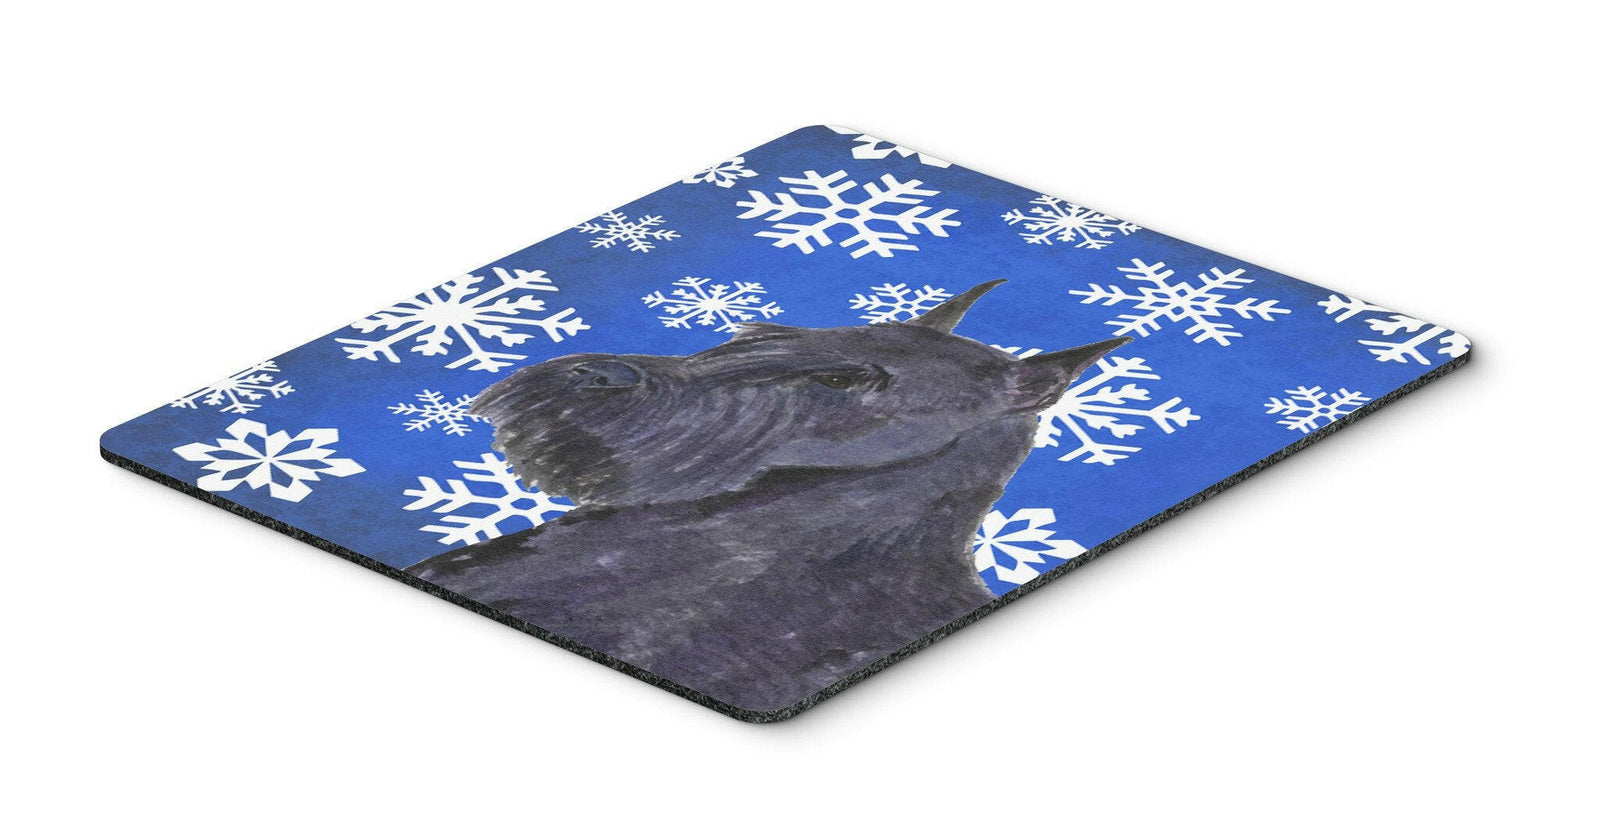 Schnauzer Winter Snowflakes Holiday Mouse Pad, Hot Pad or Trivet by Caroline's Treasures